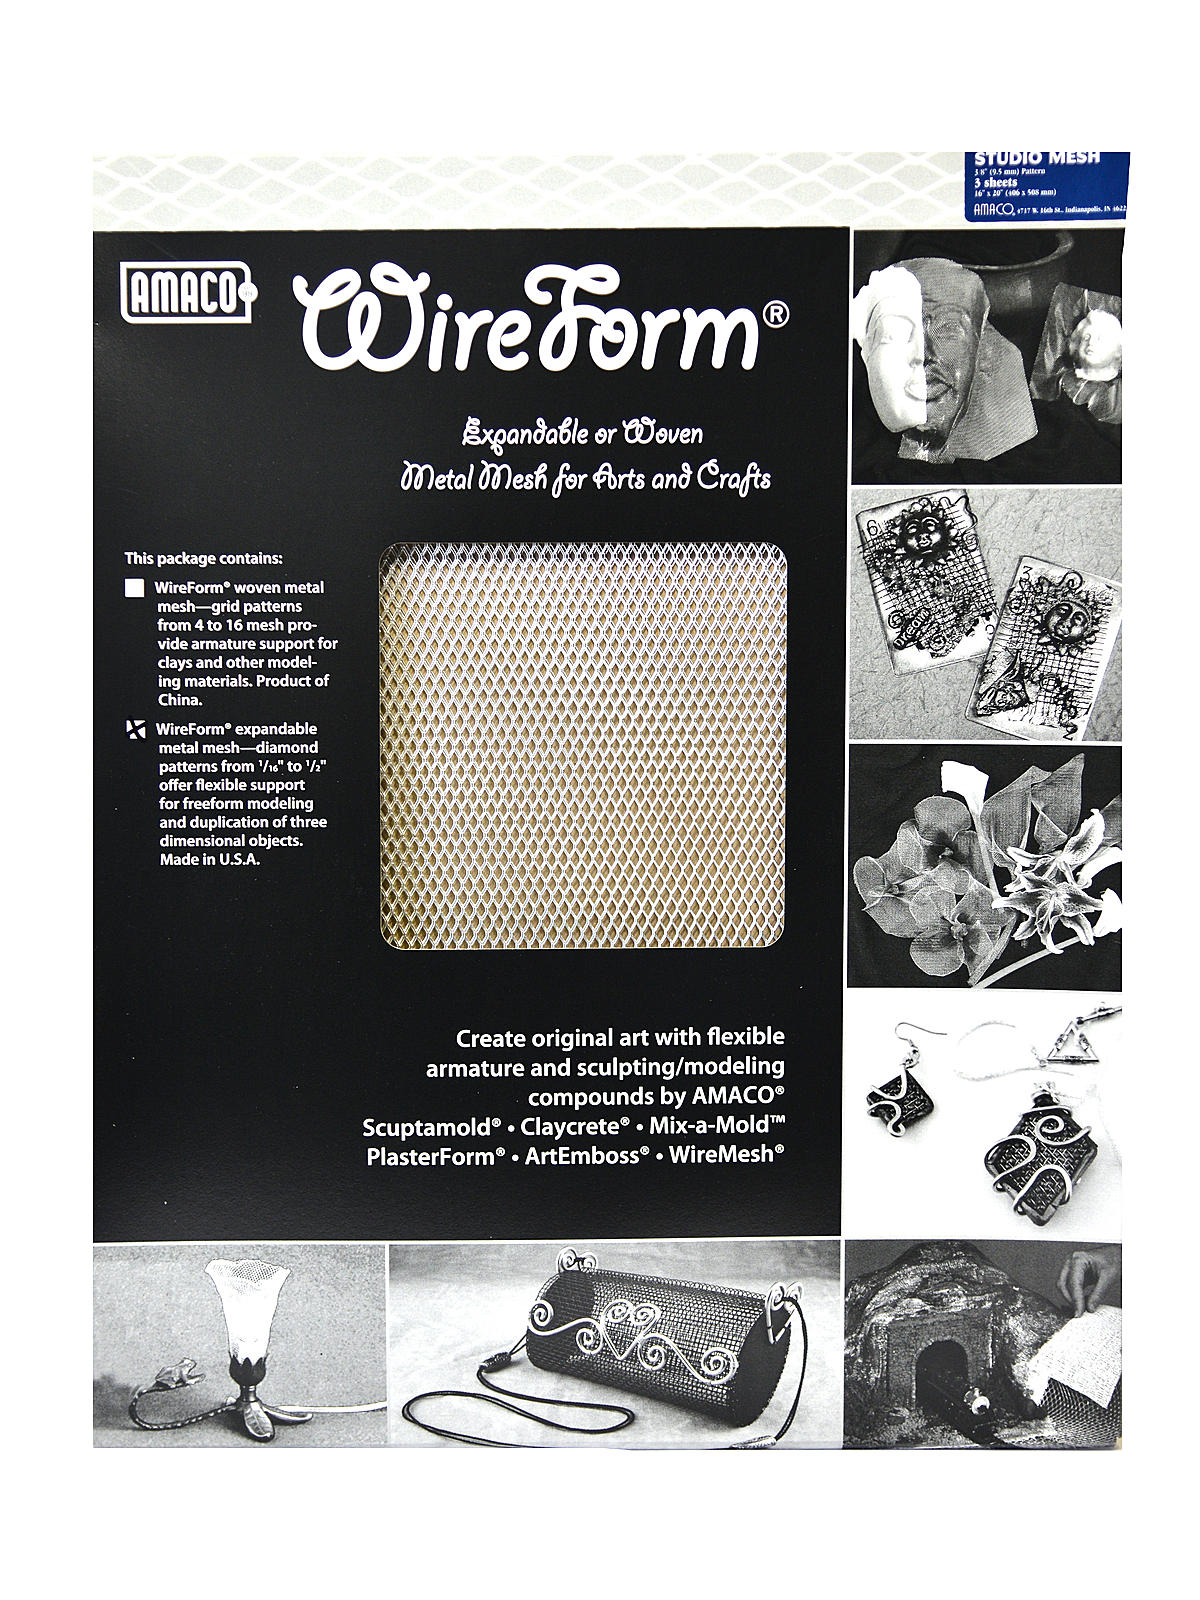 Wireform Metal Mesh Aluminum Woven Studio Mesh - 3 8 In. Pattern Pack Of 3 Sheets